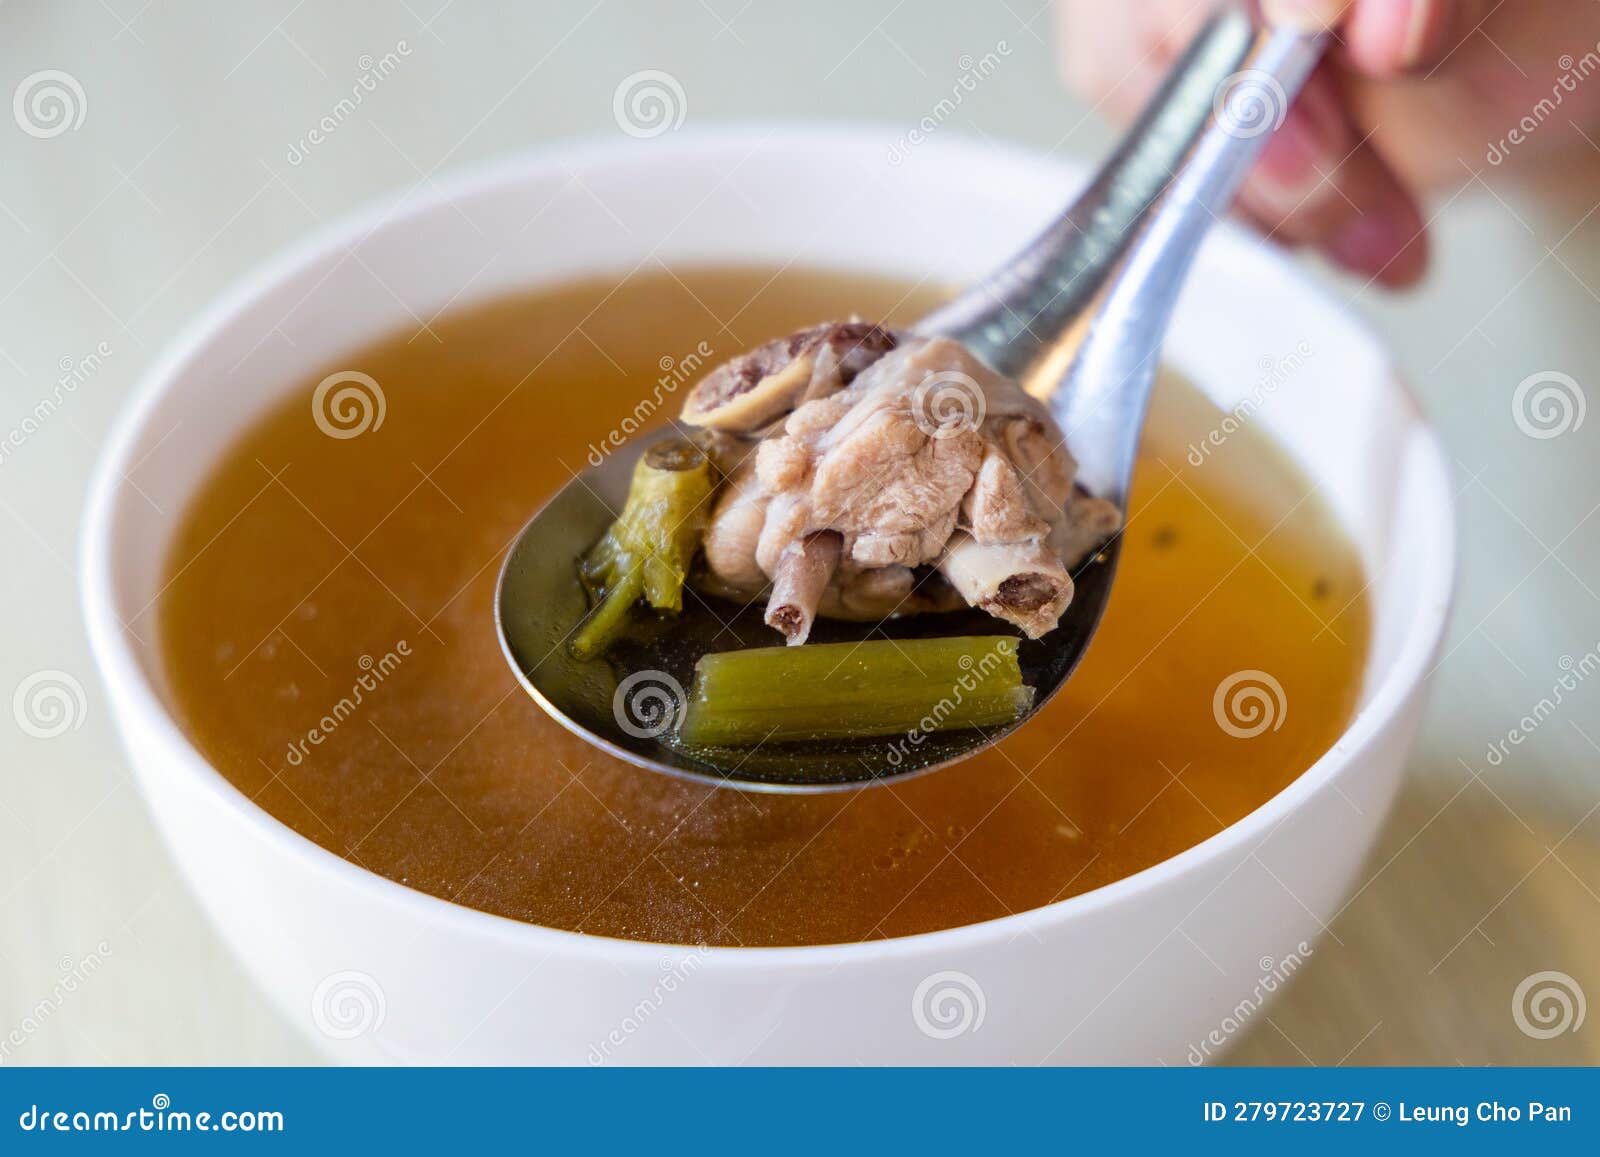 Chicken Soup Bowl in Taiwan Restaurant Stock Image - Image of gourmet ...